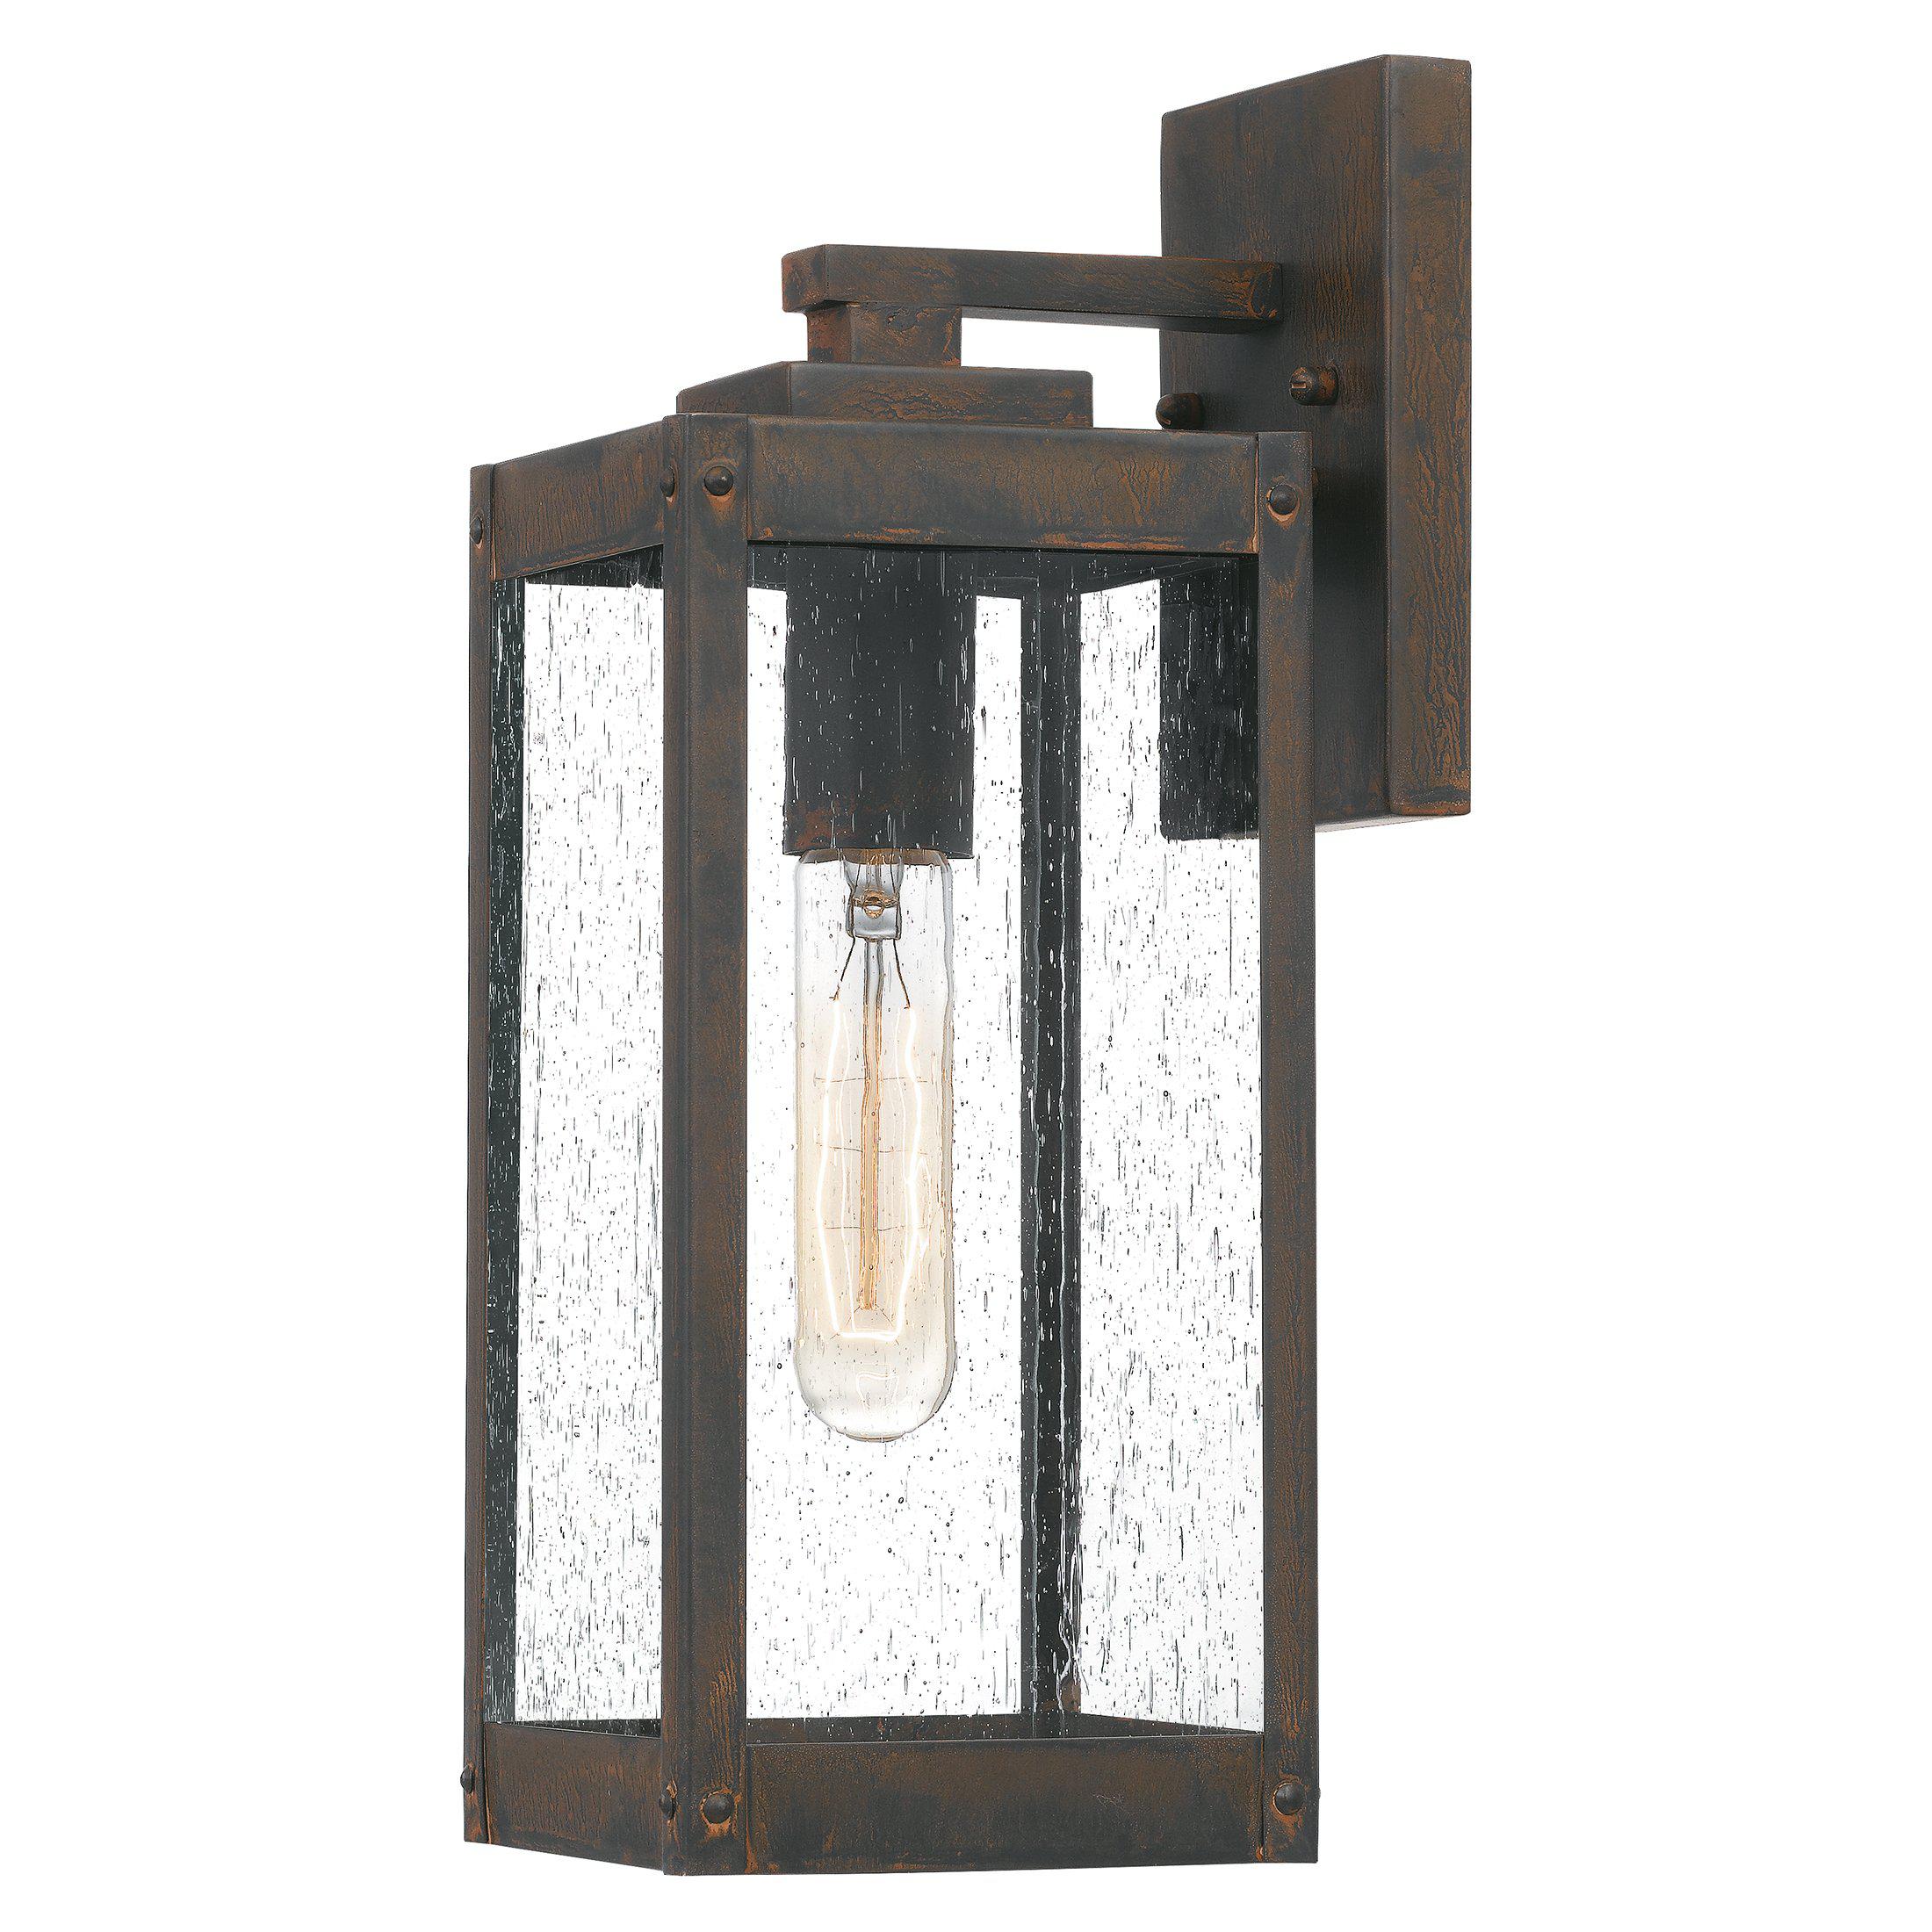 Quoizel  Westover Outdoor Lantern, Small WVR8405 Outdoor l Wall Quoizel Industrial Bronze  